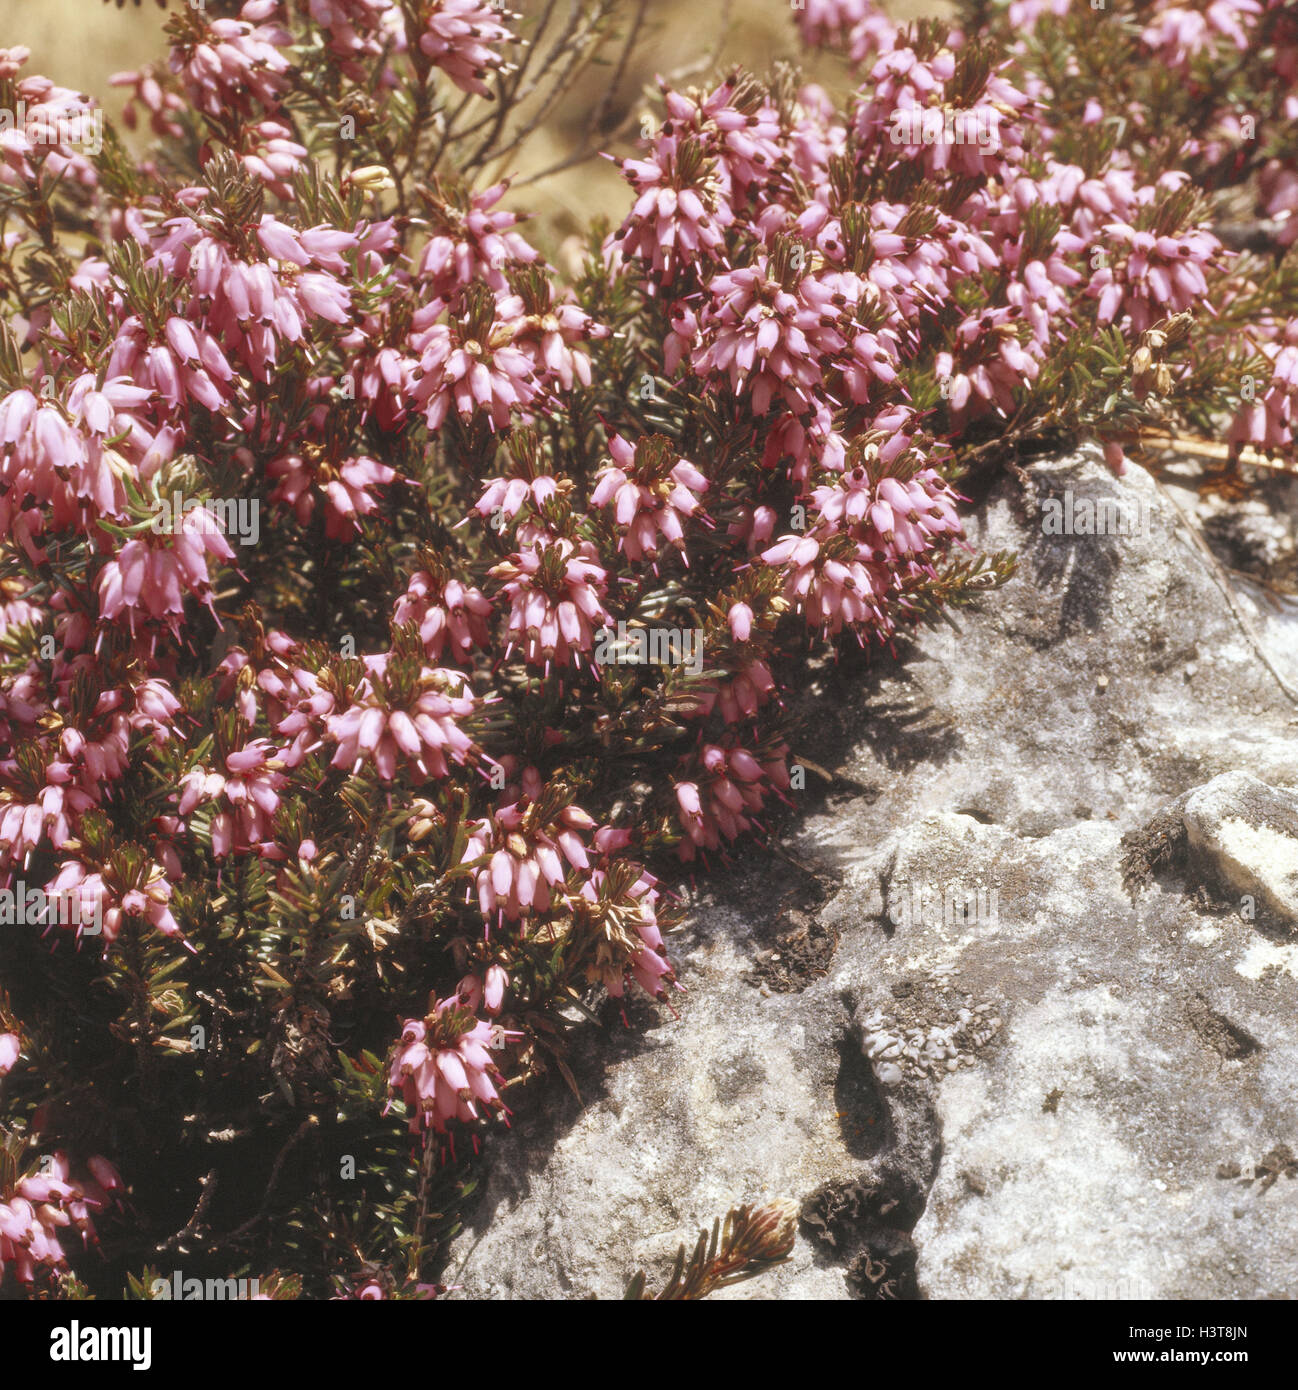 Alpine flowers, heather, Erica carnea, nature, botany, flora, plants, flowers, Alpine flowers, heather, winter moor, snow moor, blossoms, blossom, red, heather plant, Ericaceae, period bloom, late winter, spring Stock Photo